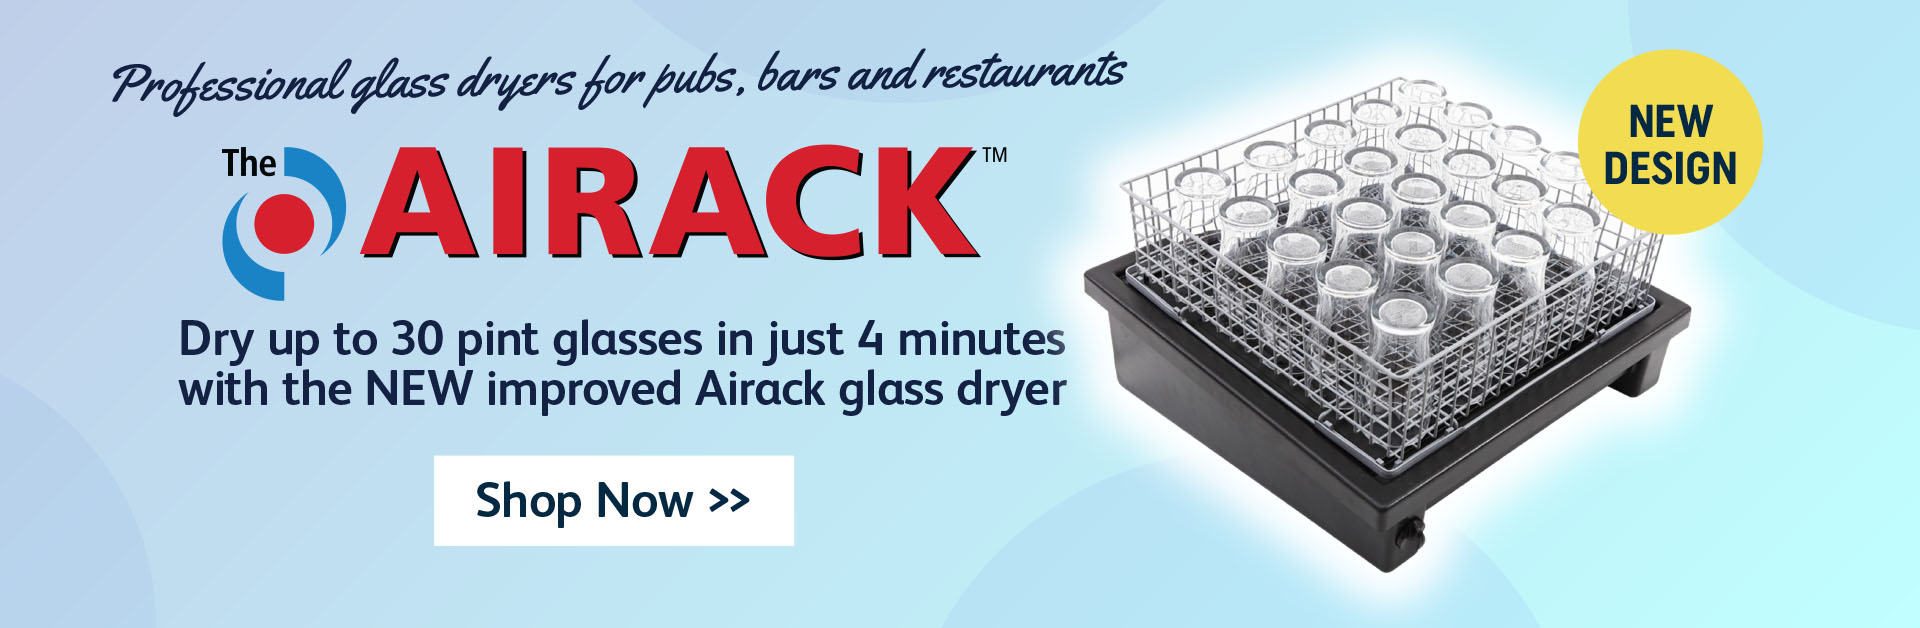 Airack Glass Dryers - New Improved Version. Low Prices, Fast Delivery!